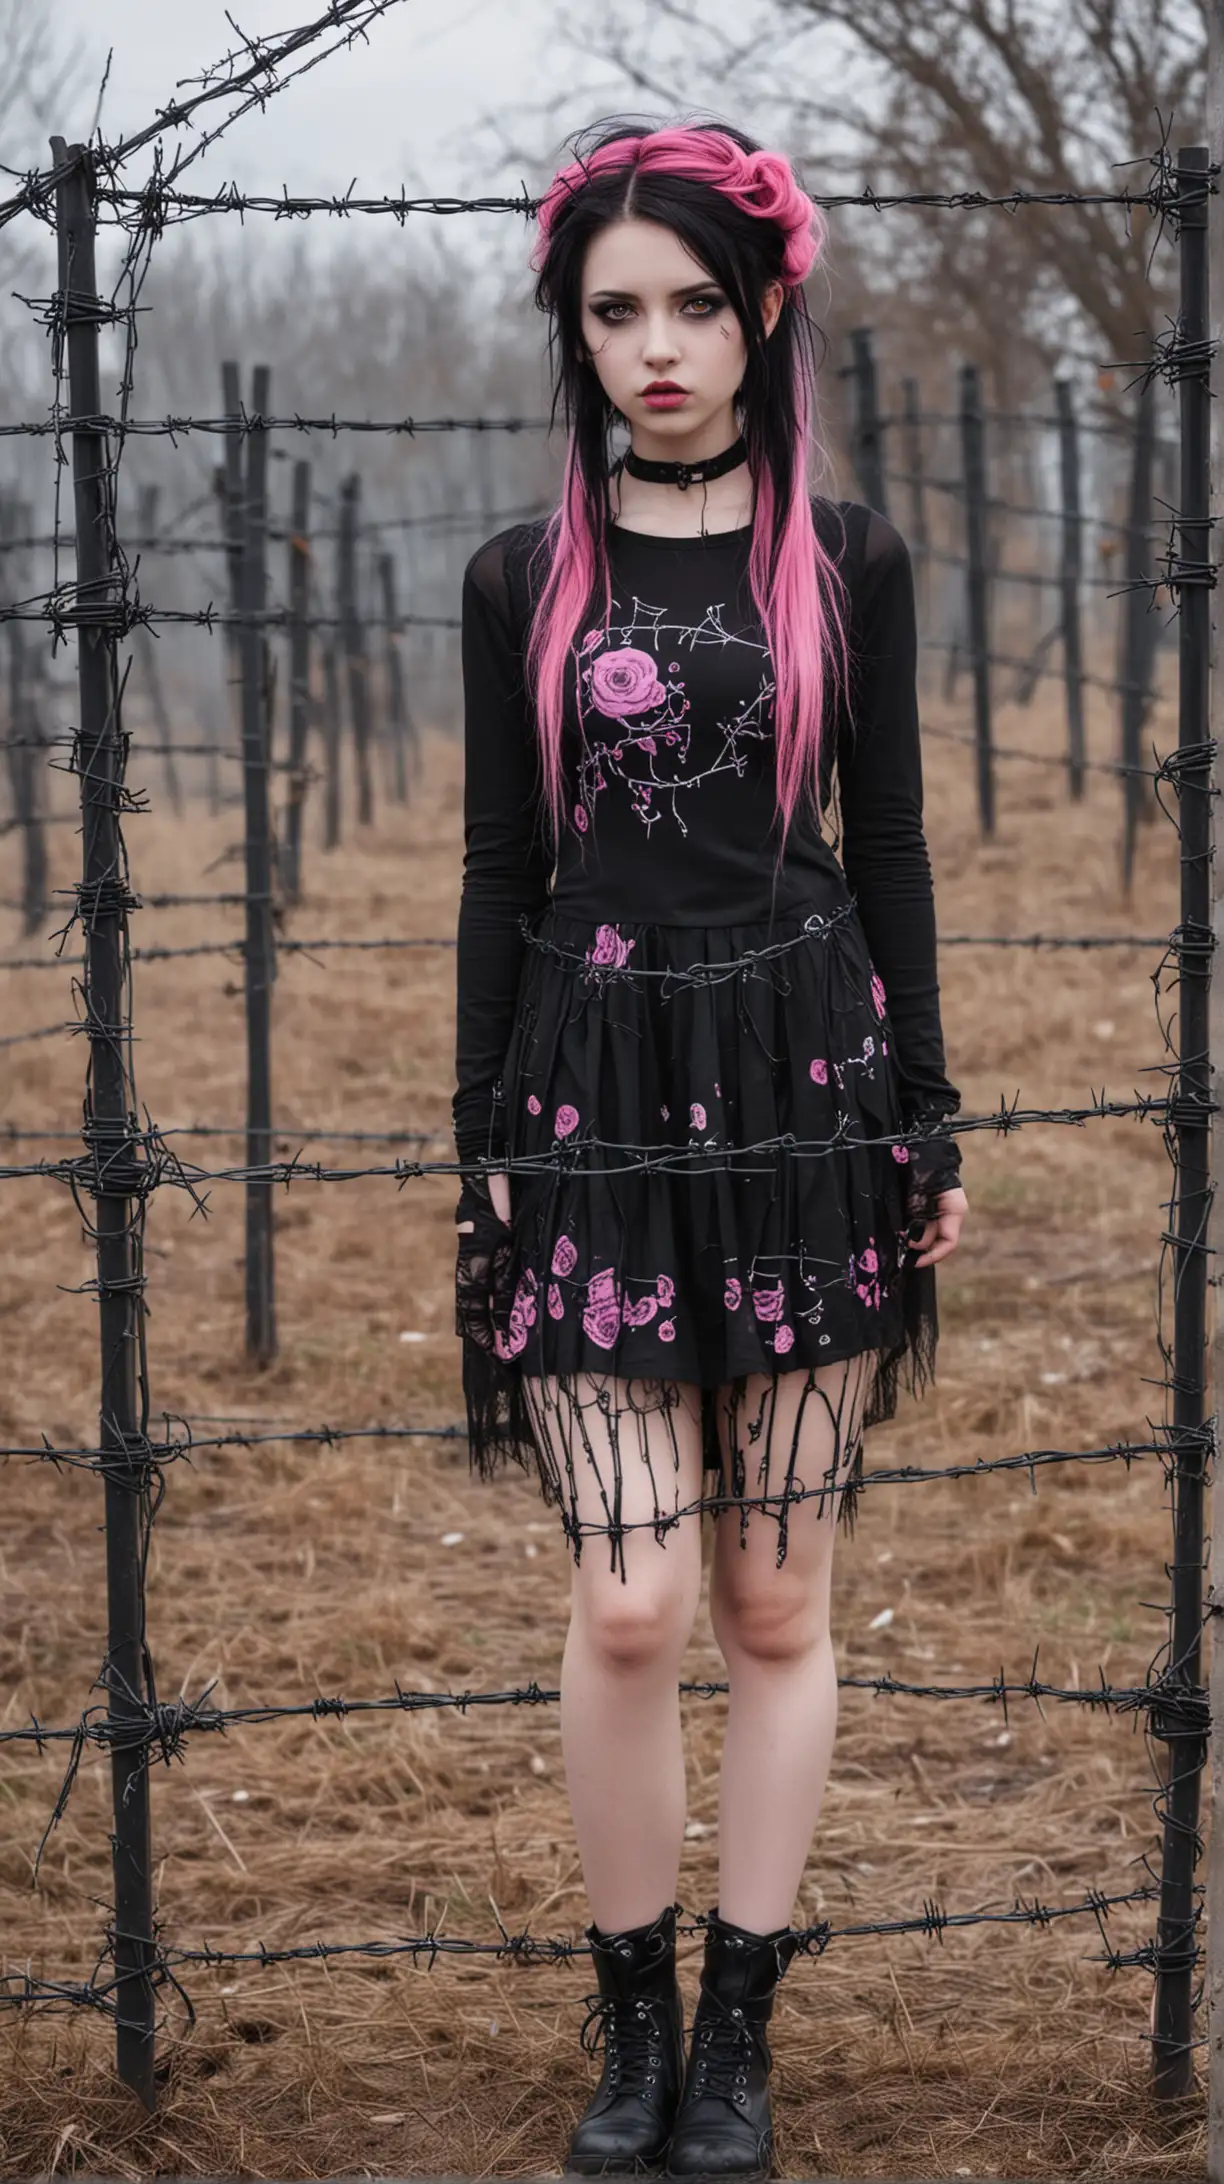 Pretty goth girl, make it pink themed. surrounded by barbed wire
